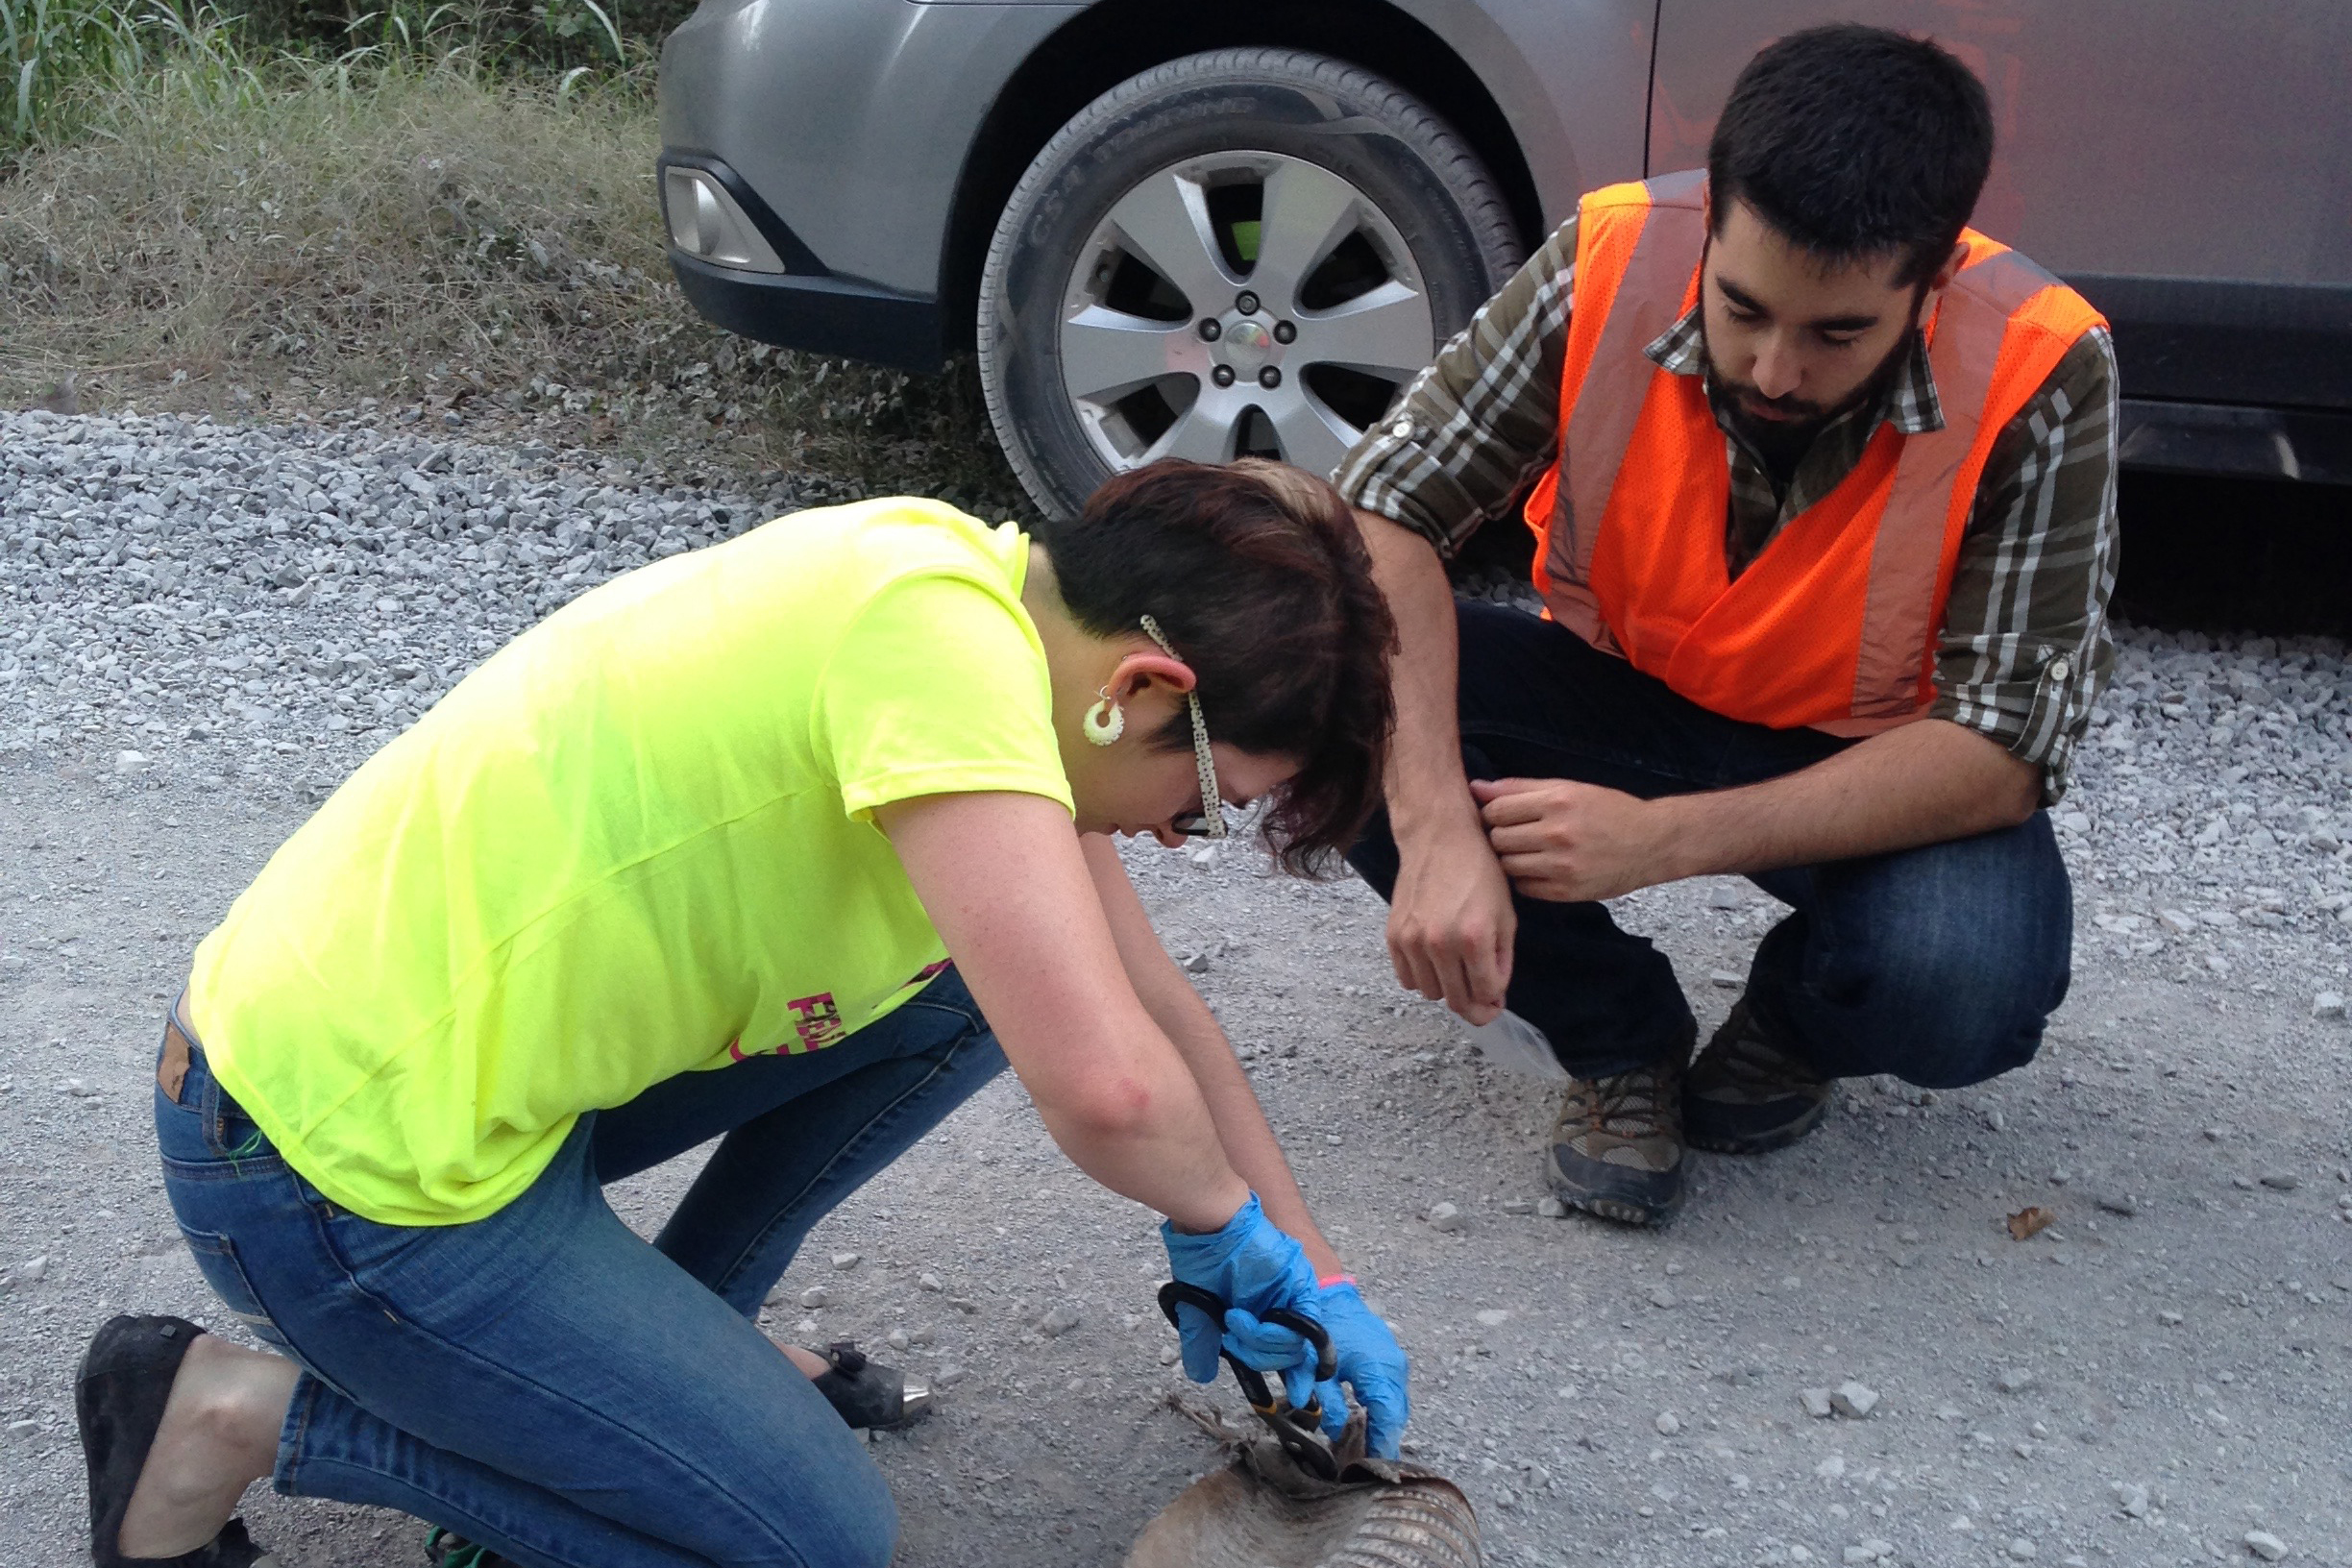 Two individuals crouch at the side of the road to examine roadkill. A woman appears on the left, with her gloves hands cutting into the neck of the animal with scissors. A man looks on from the right. He wears a reflective safety vest.